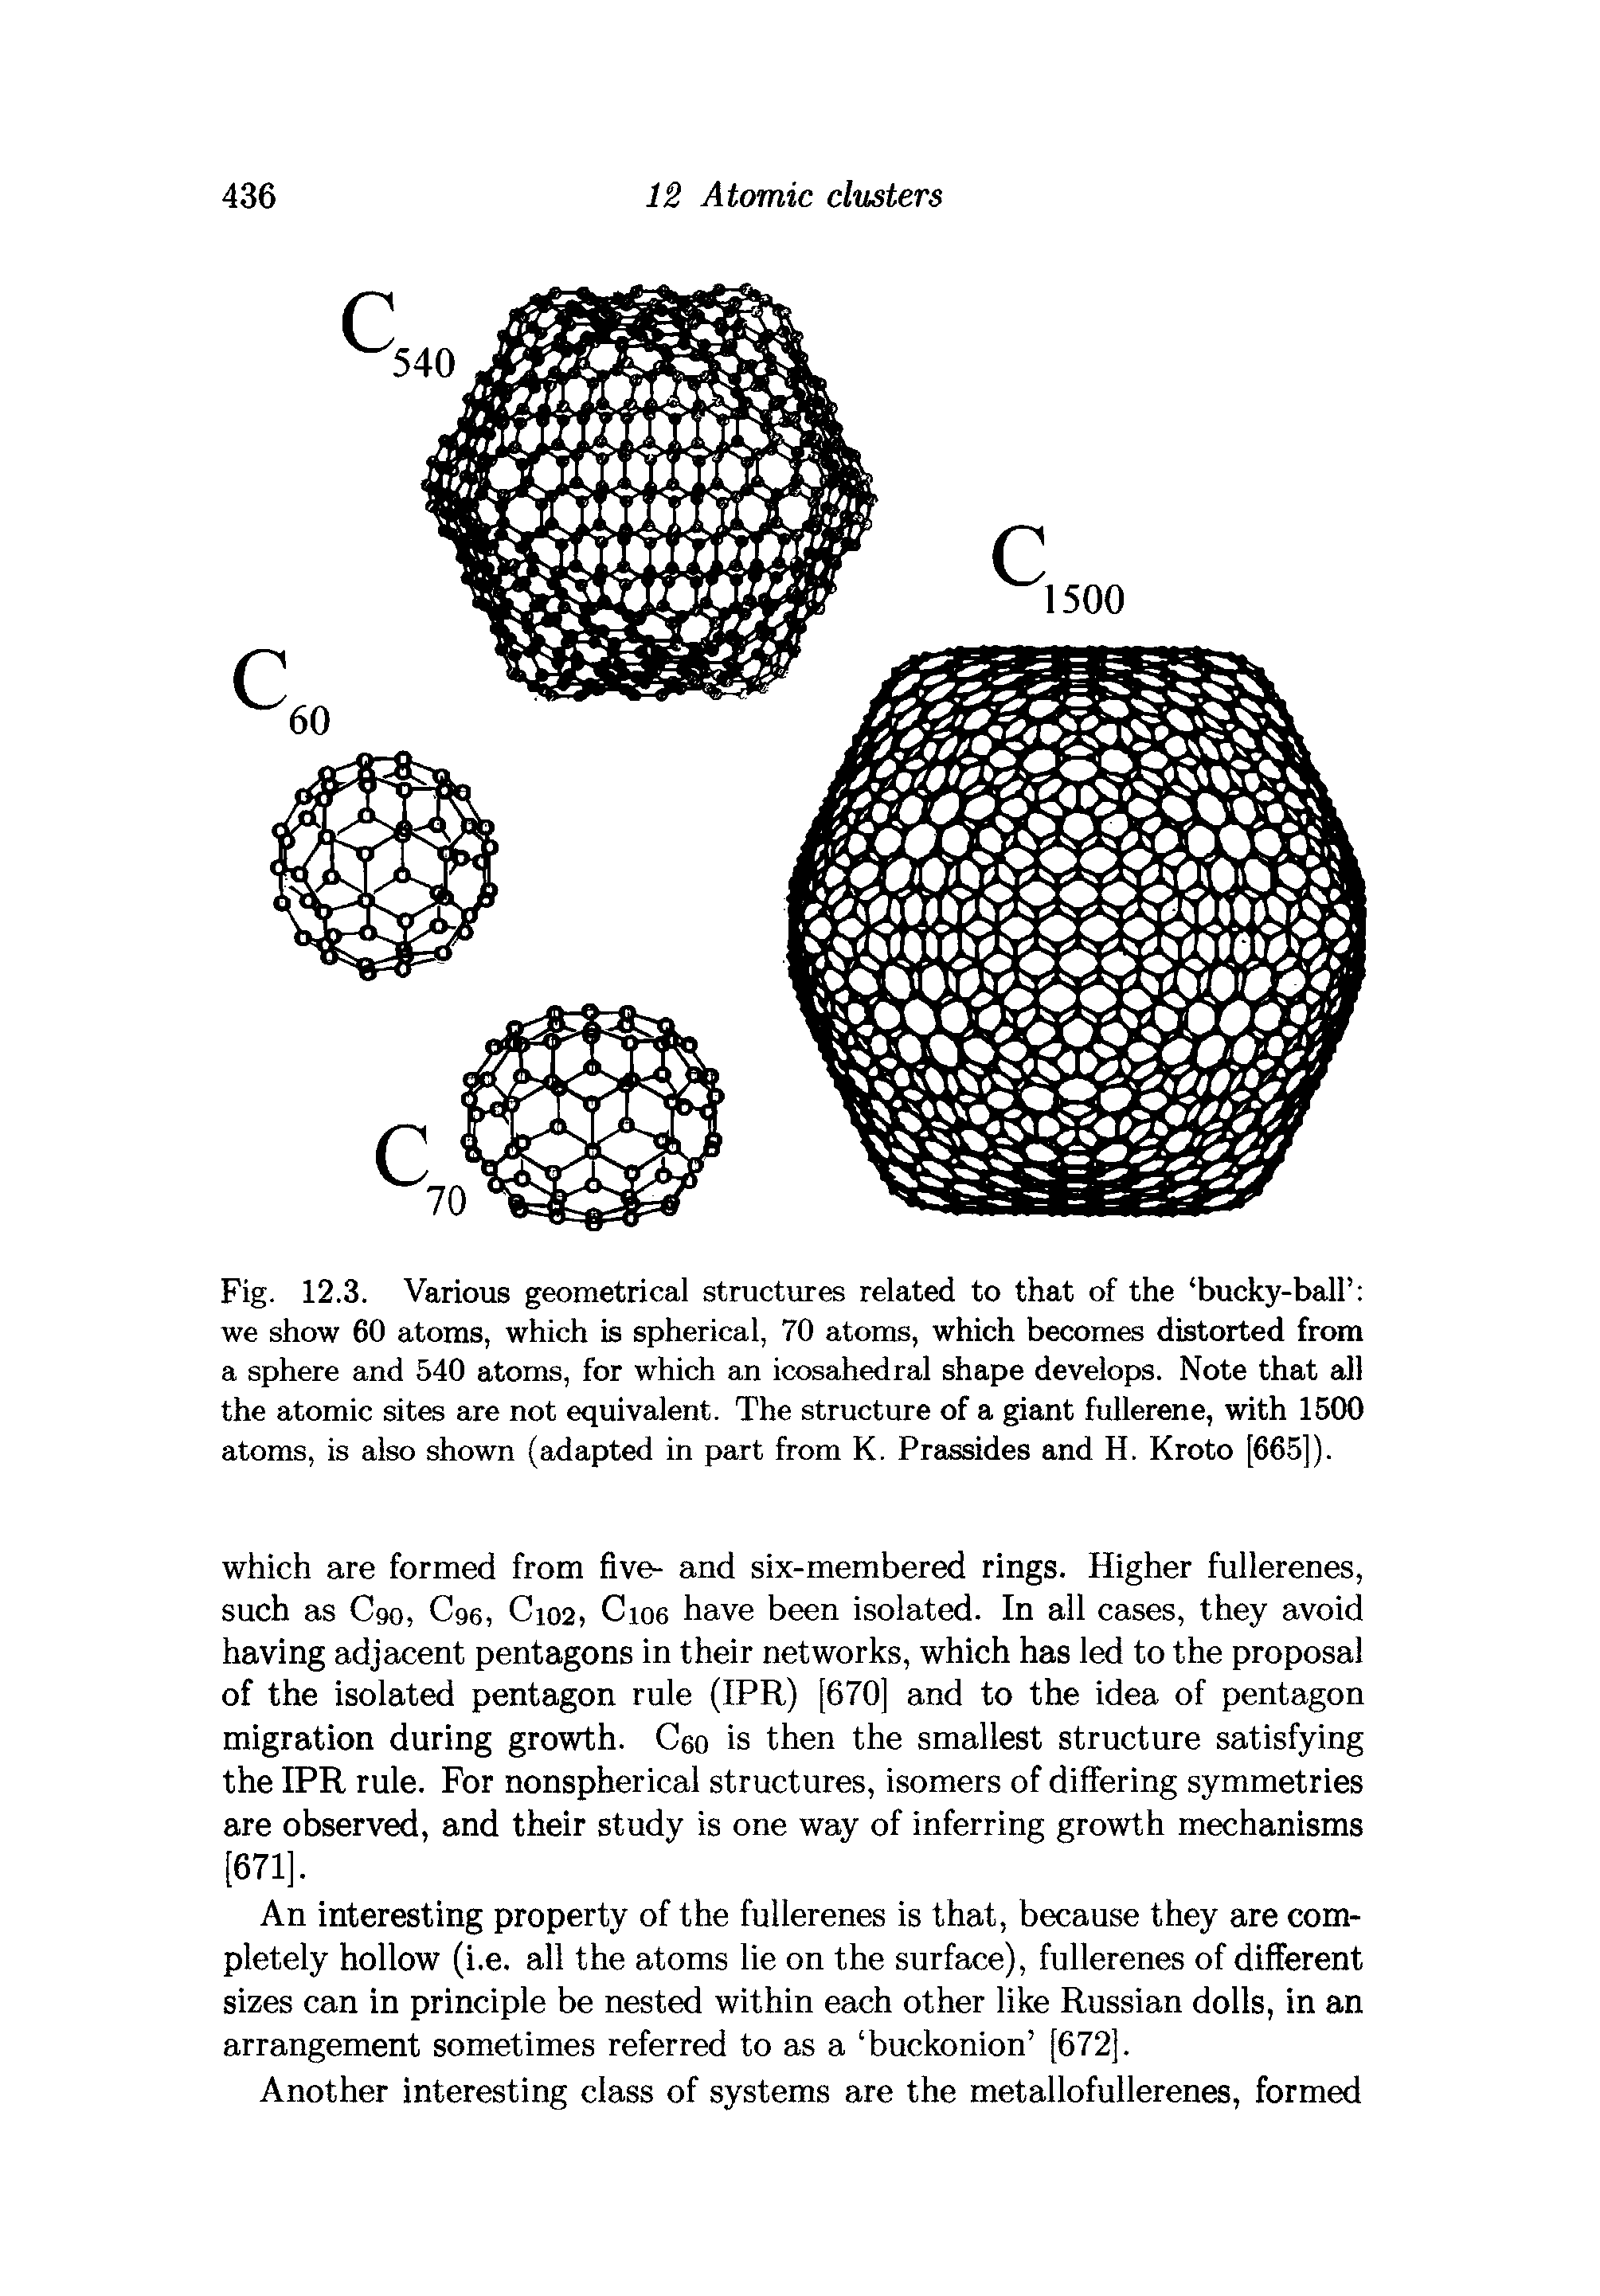 Fig. 12.3. Various geometrical structures related to that of the bucky-ball we show 60 atoms, which is spherical, 70 atoms, which becomes distorted from a sphere and 540 atoms, for which an icosahedral shape develops. Note that all the atomic sites are not equivalent. The structure of a giant fullerene, with 1500 atoms, is also shown (adapted in part from K. Prassides and H. Kroto [665]).